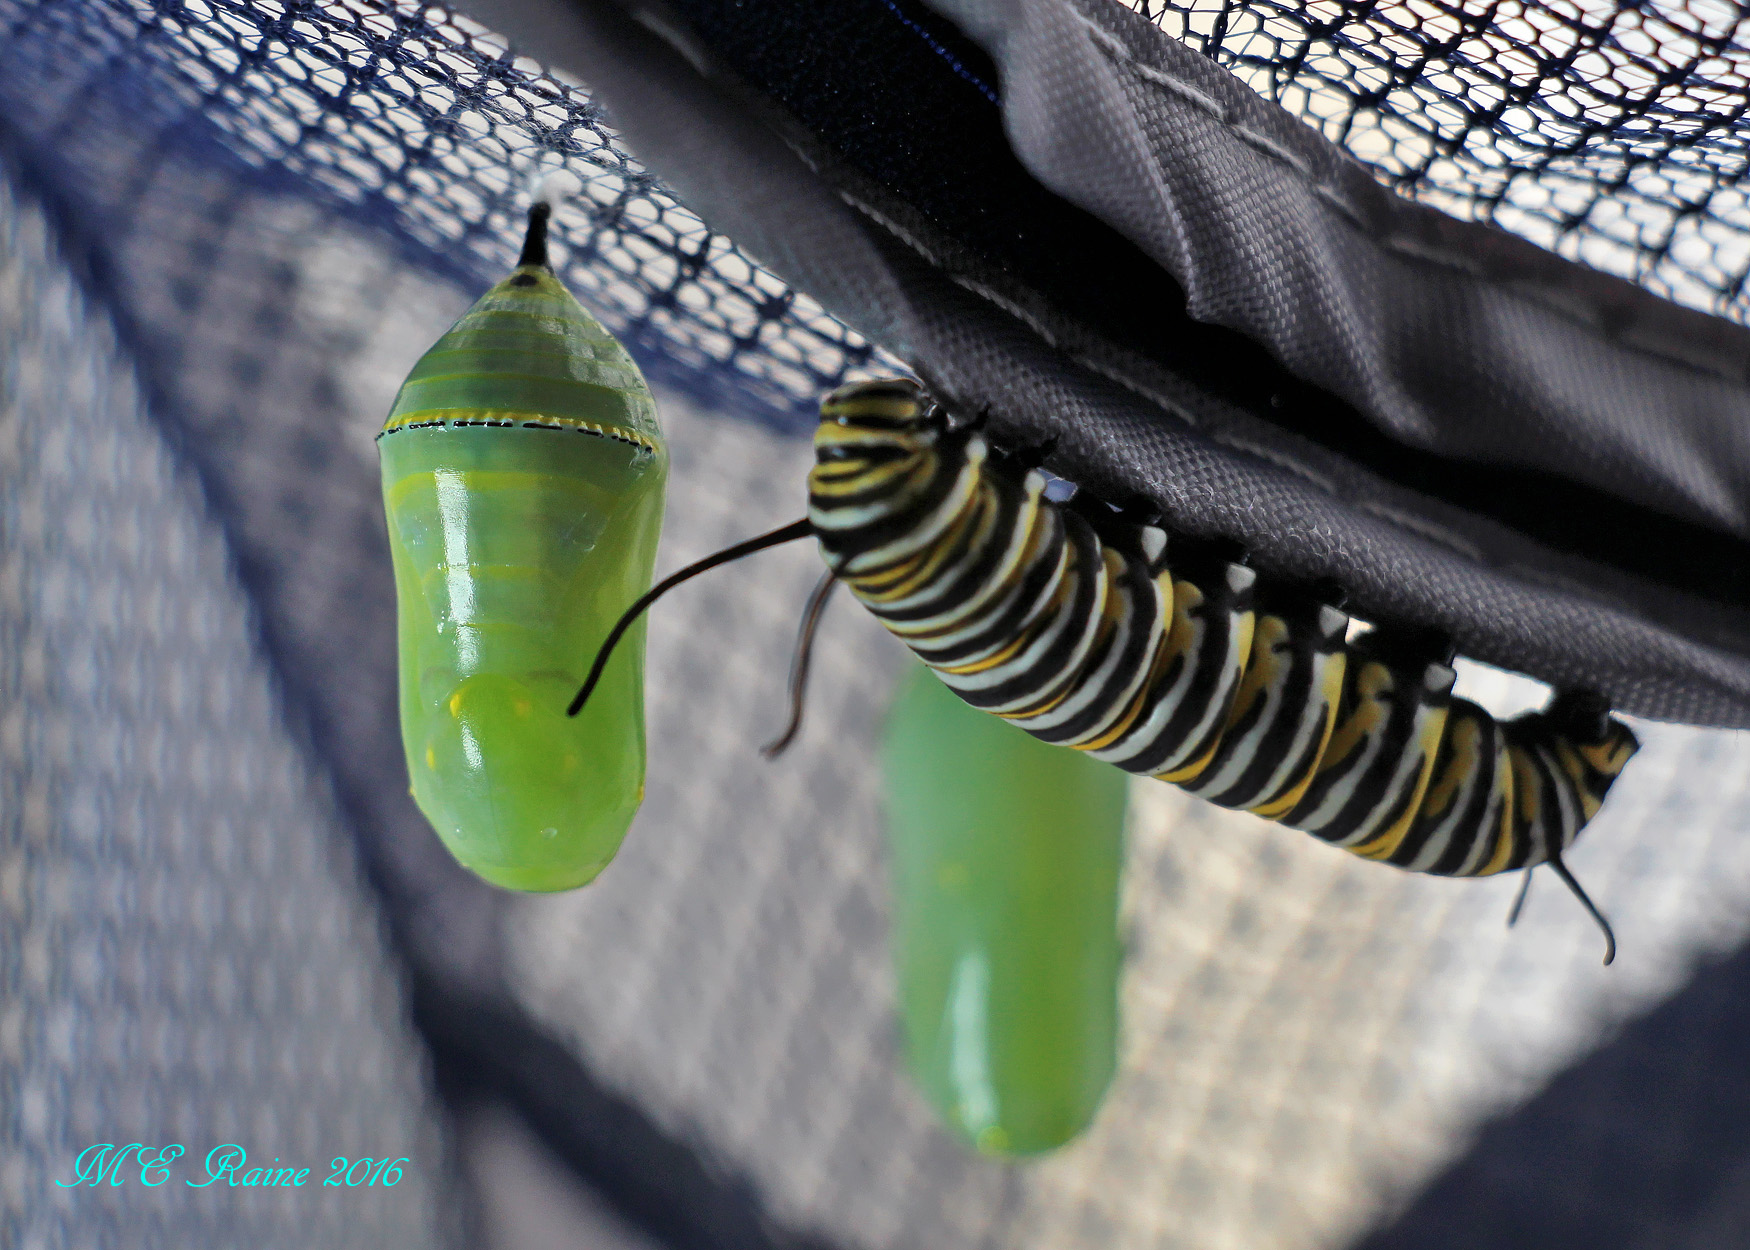 monarch-butterfly-with-2-chrysalis-no-2-chrysalis-day-1-safe-house-1-090816-1pm-ok-wm